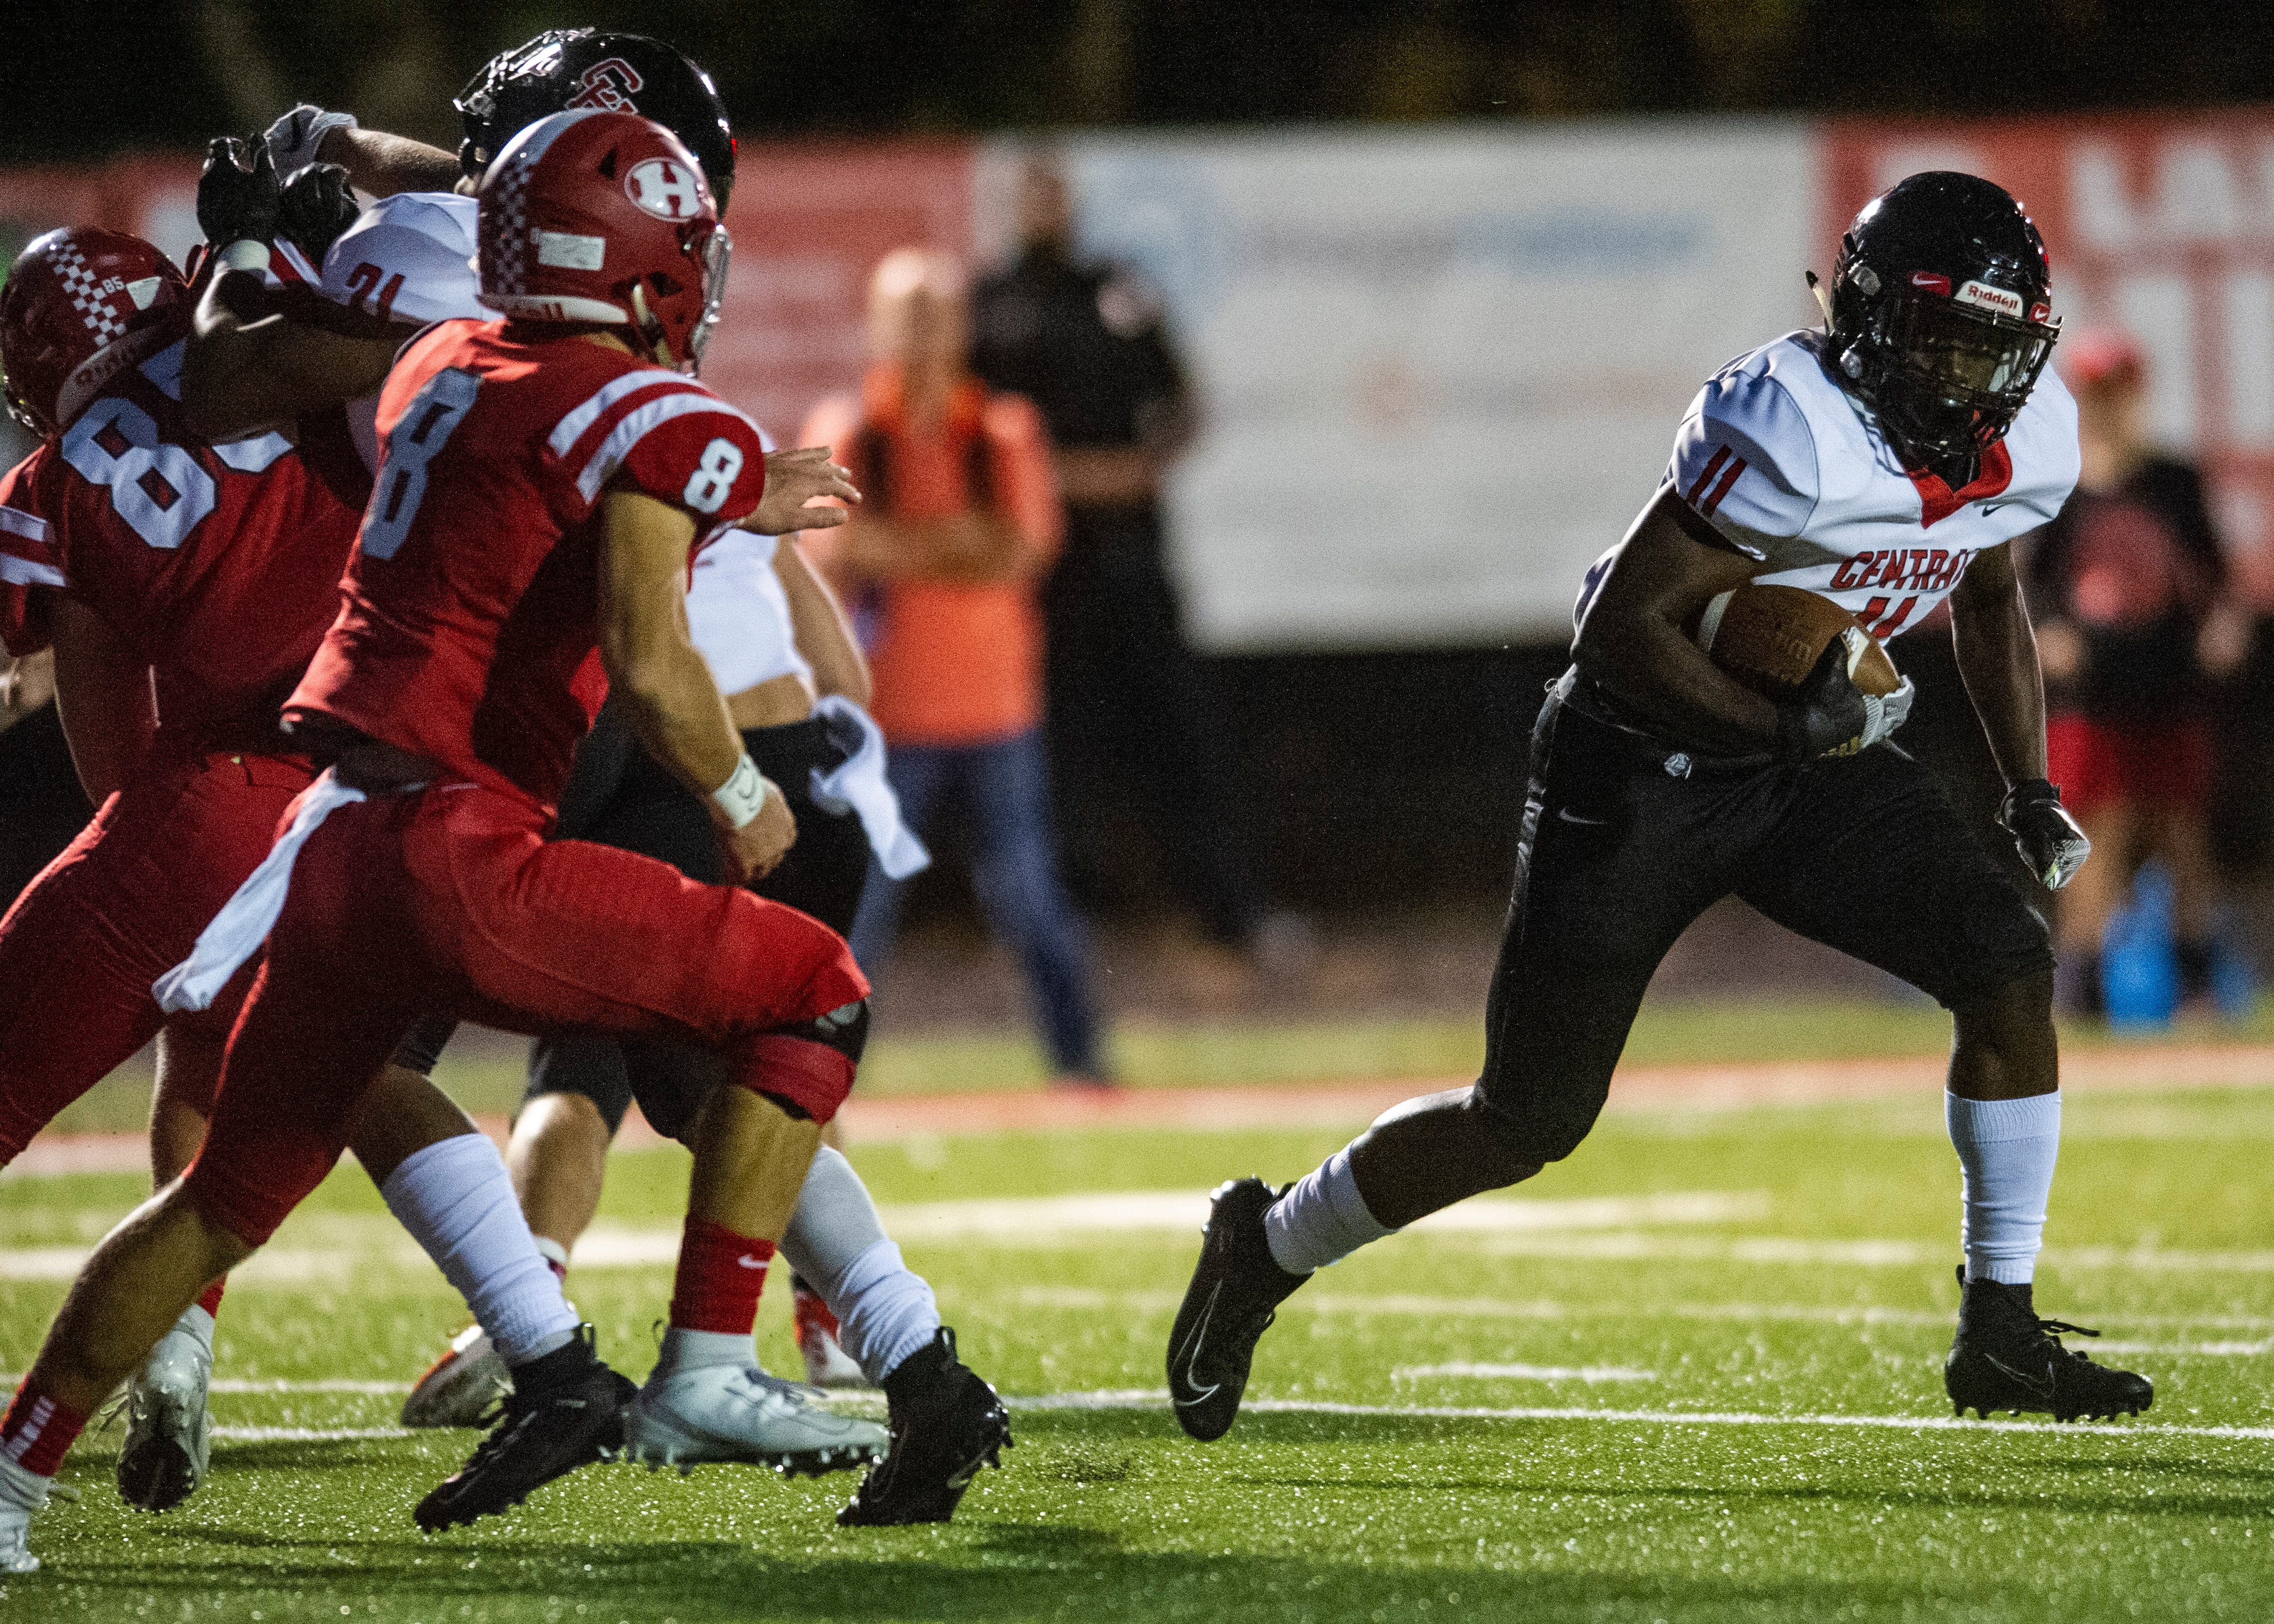 Central's Jason Merritts (11) looks for a gap in the play during the Halls and Central high school football game on Friday, October 4, 2019 at Halls High School.